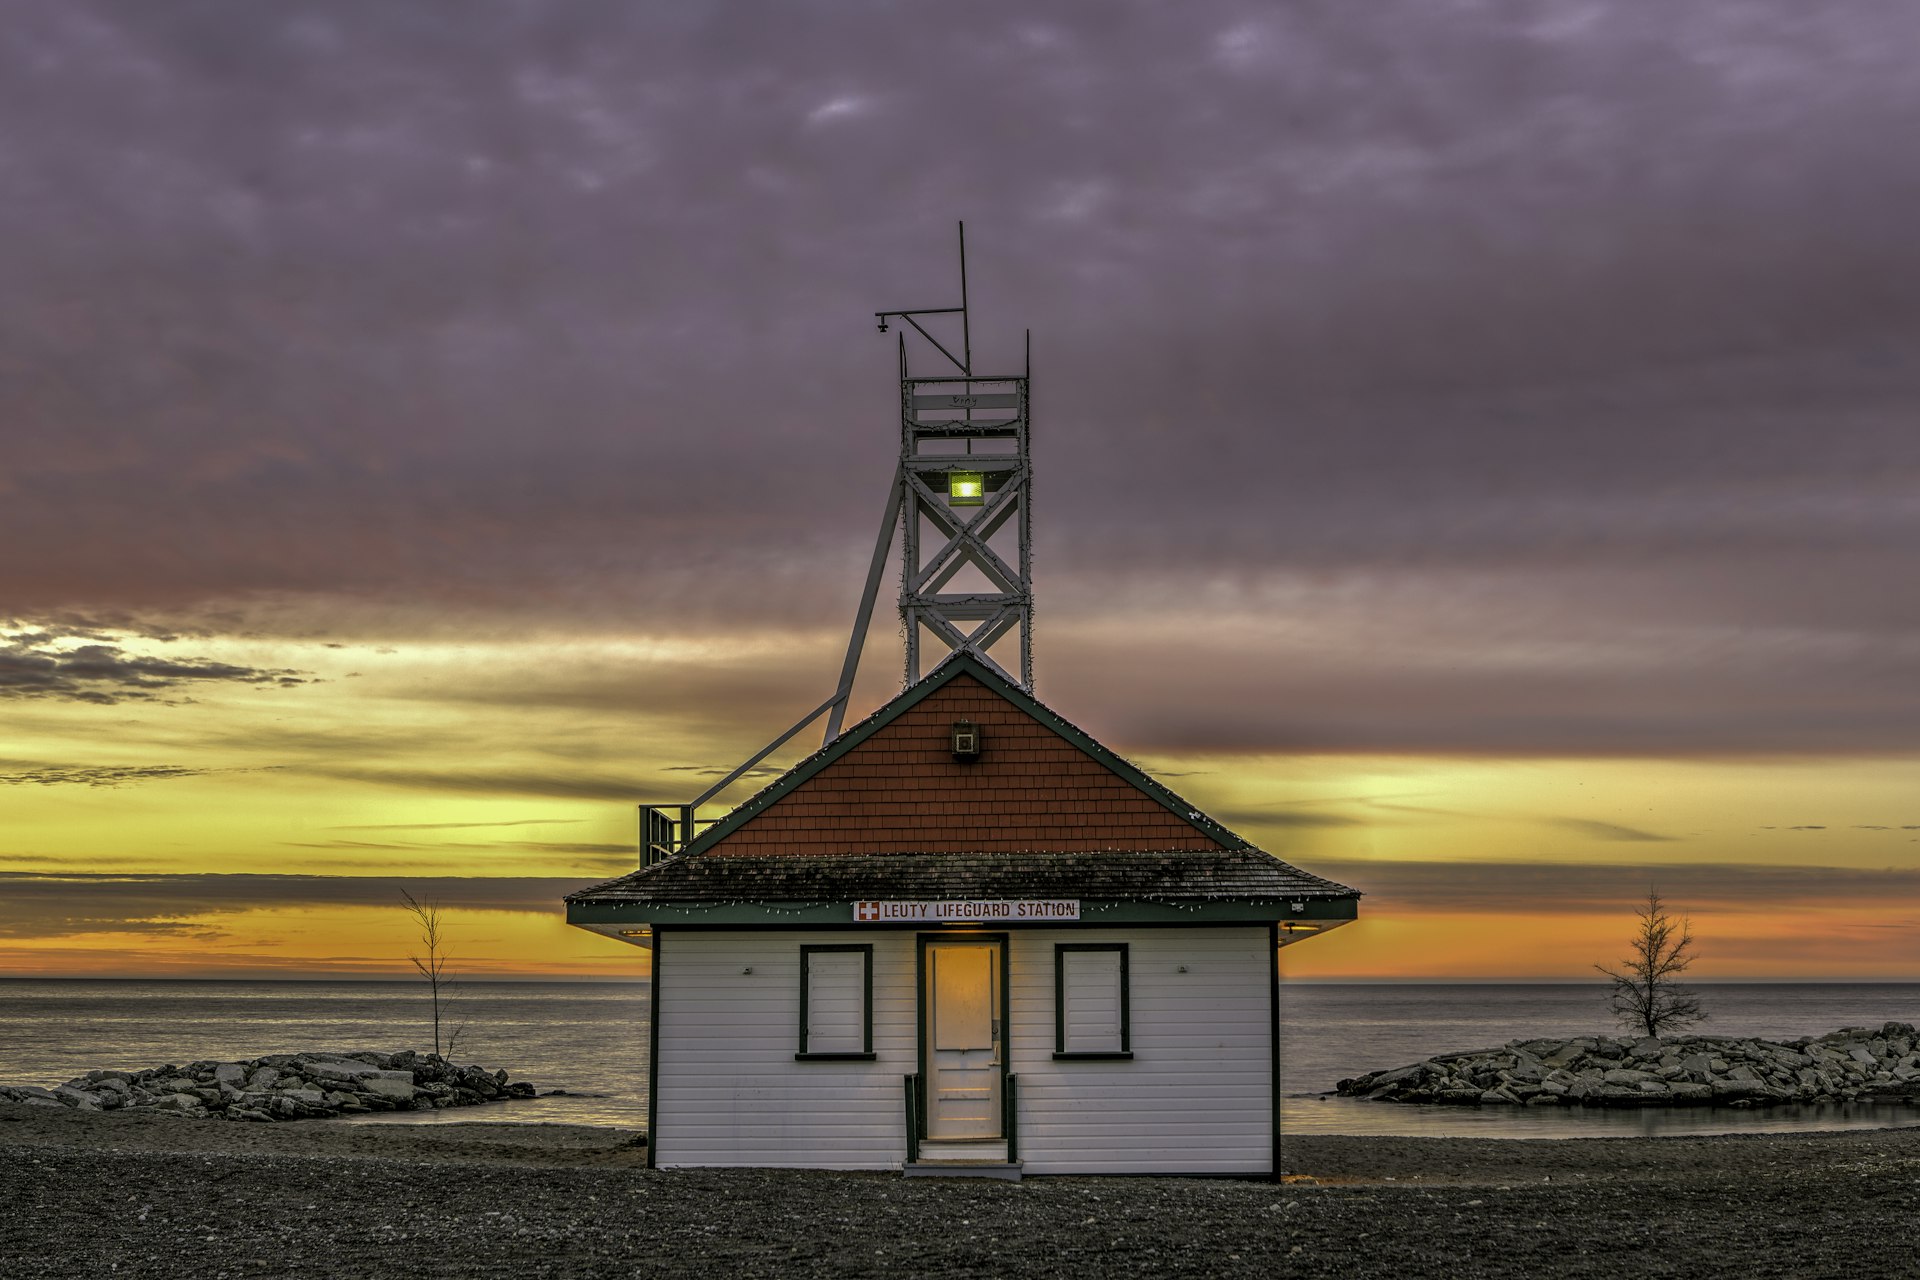 A lifeguard station with a sunrise inthe background